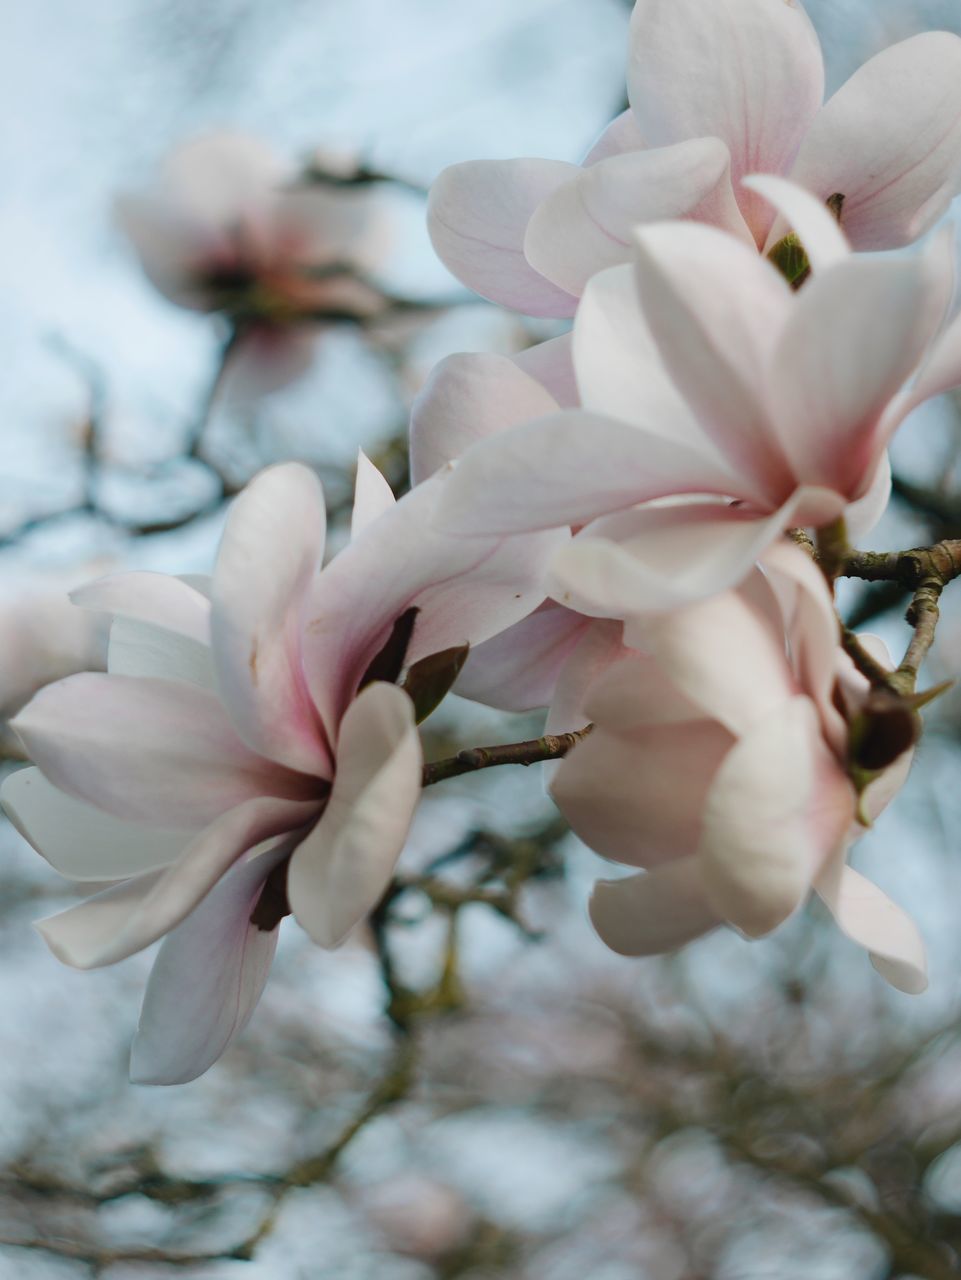 plant, flower, flowering plant, blossom, beauty in nature, freshness, spring, fragility, petal, magnolia, close-up, nature, growth, pink, tree, springtime, branch, focus on foreground, no people, flower head, inflorescence, macro photography, outdoors, white, day, selective focus, twig, botany, lilac, cherry blossom